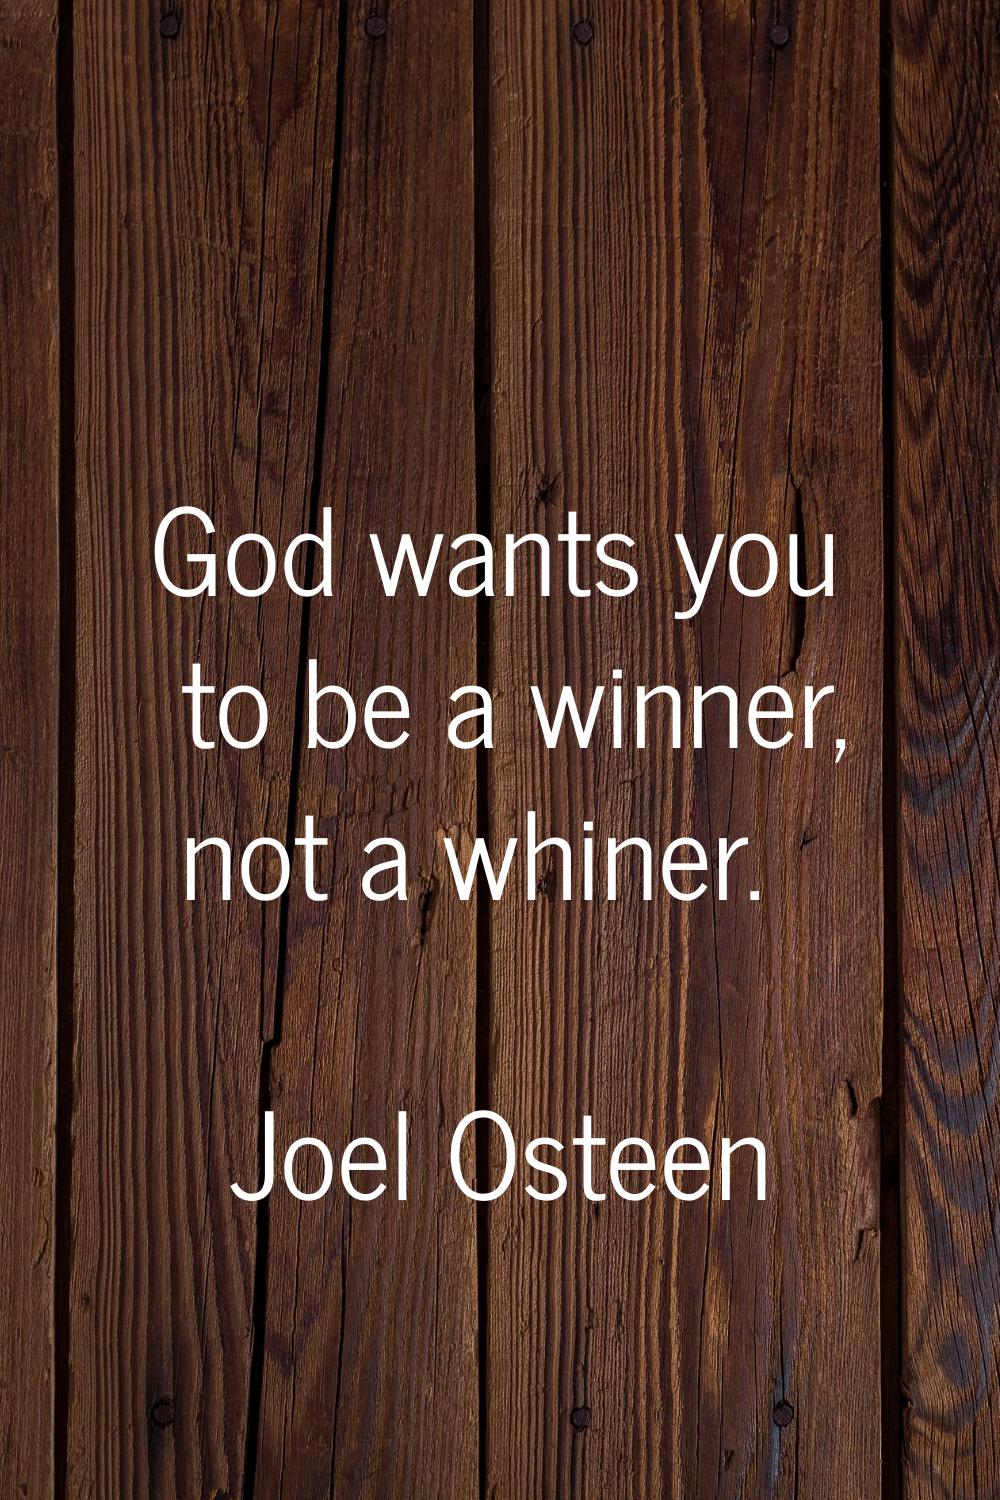 God wants you to be a winner, not a whiner.